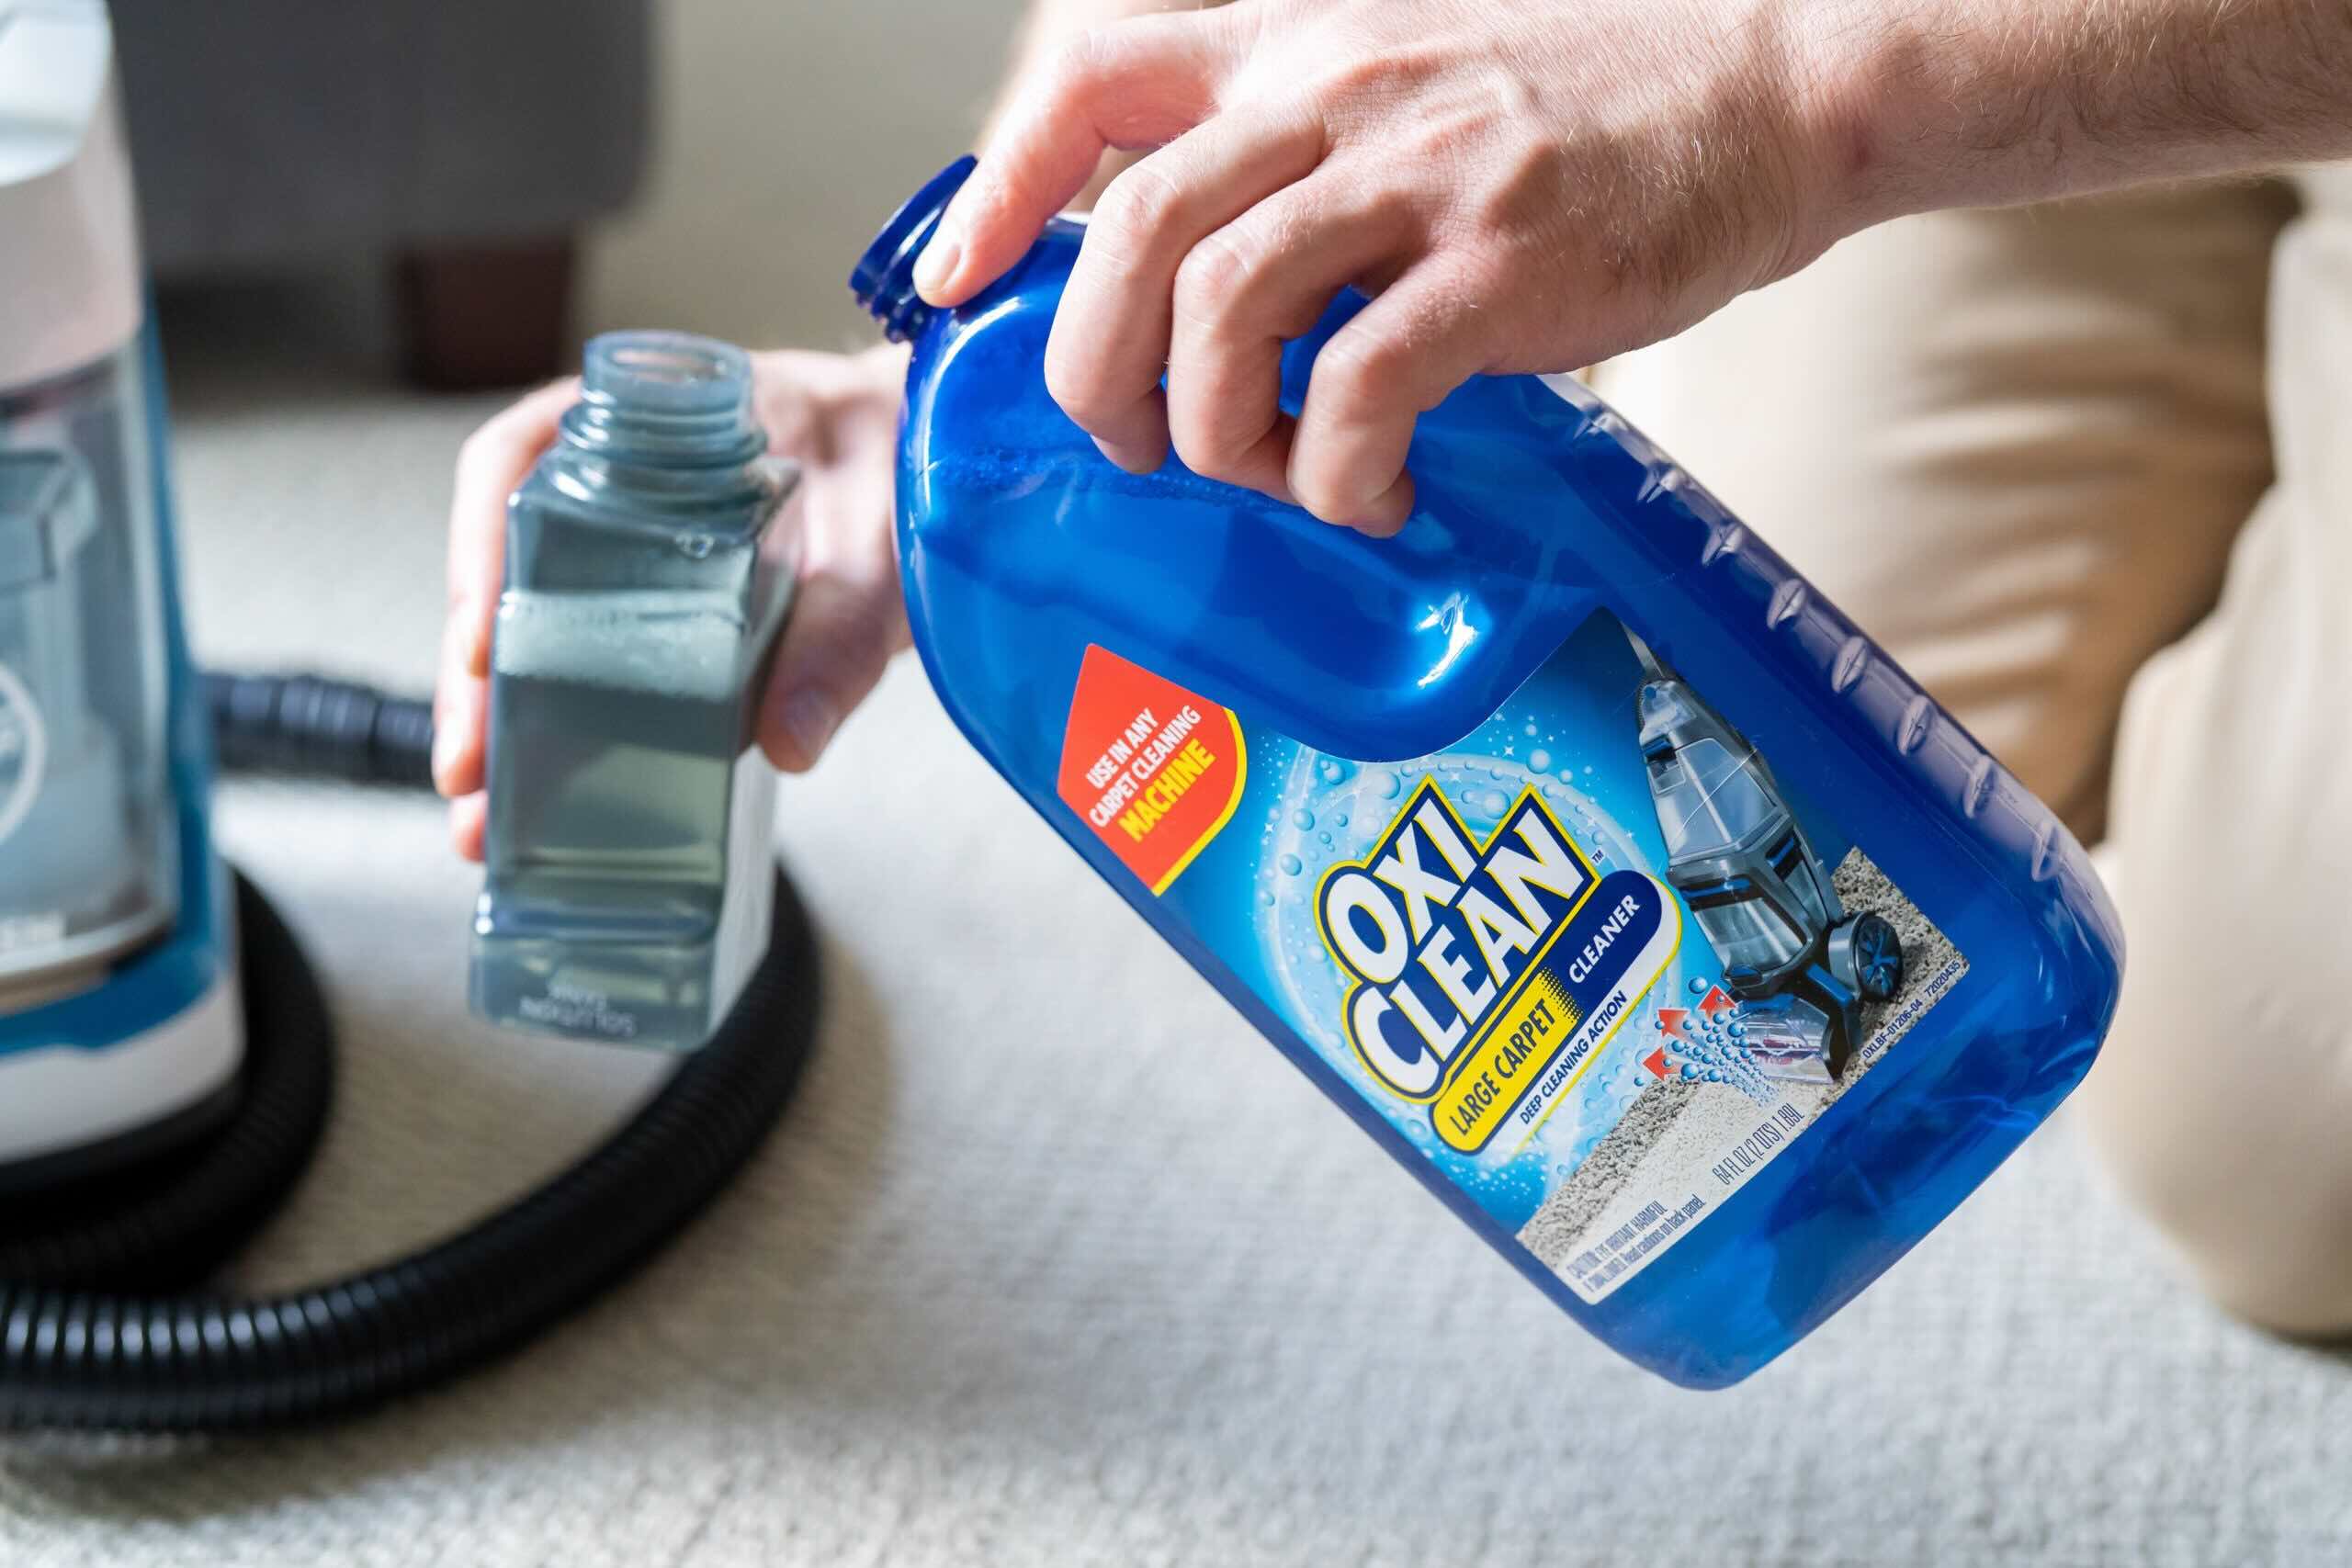 The 8 Best Steam Cleaners of 2023